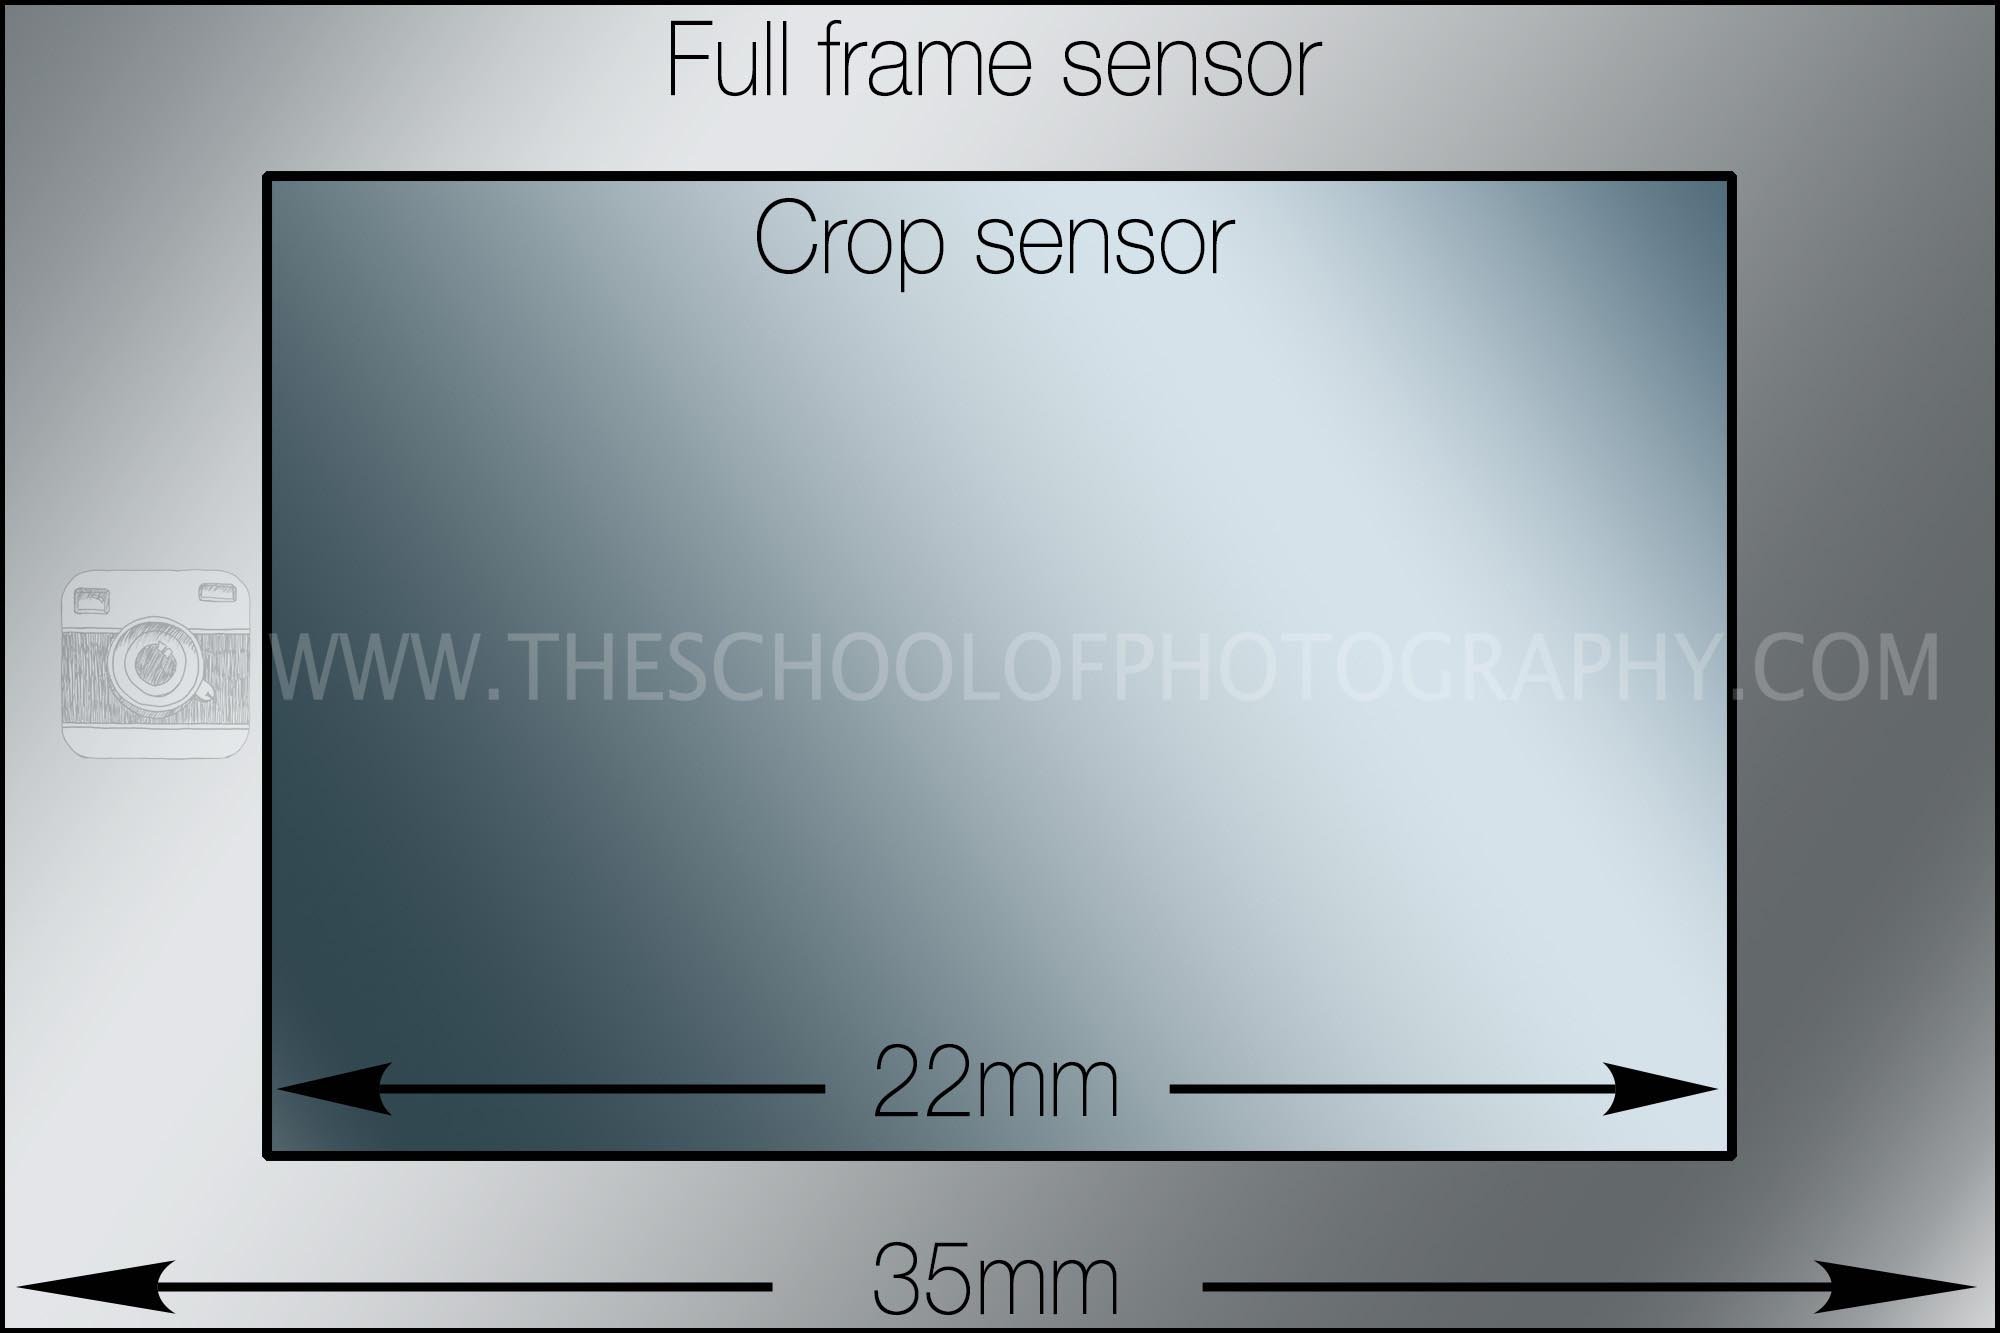 Graphic showing camera’s sensor sizes between APS-C and Full Frame